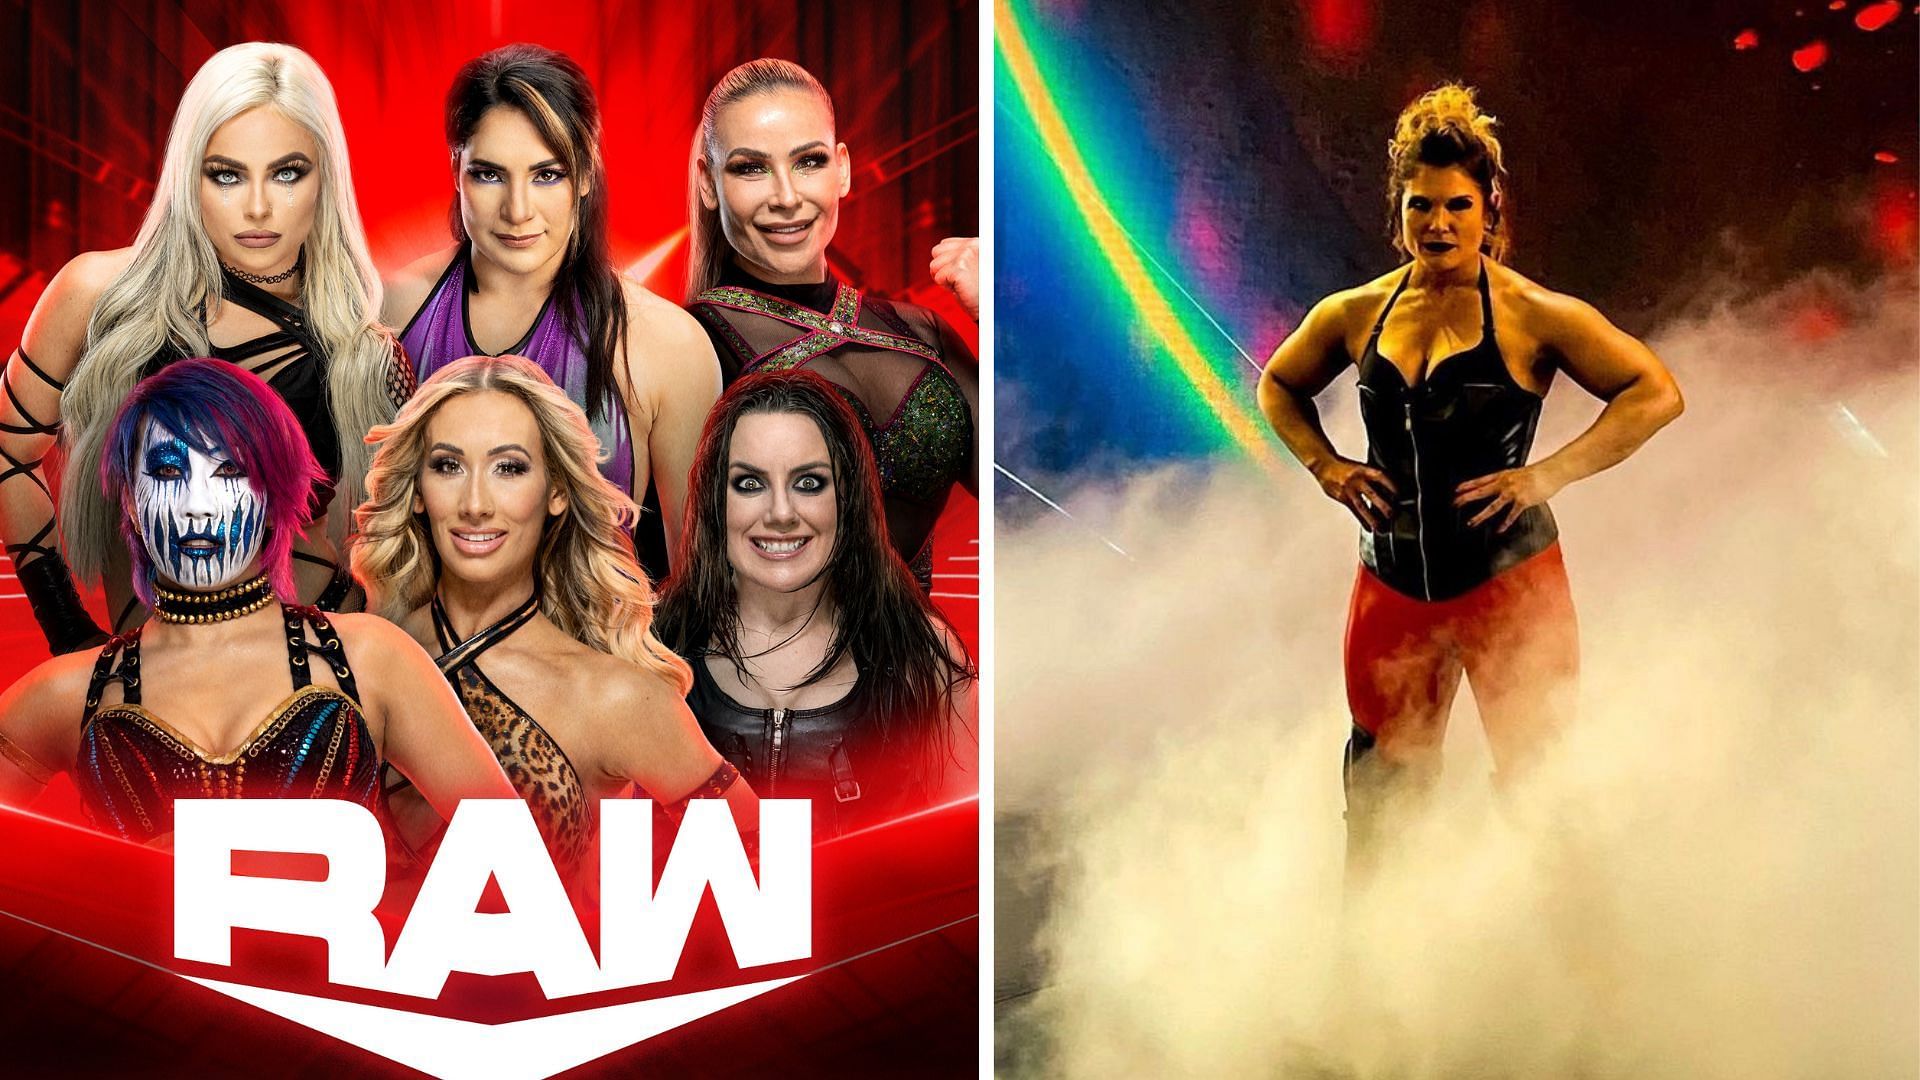 WWE RAW is set to feature some stellar matches